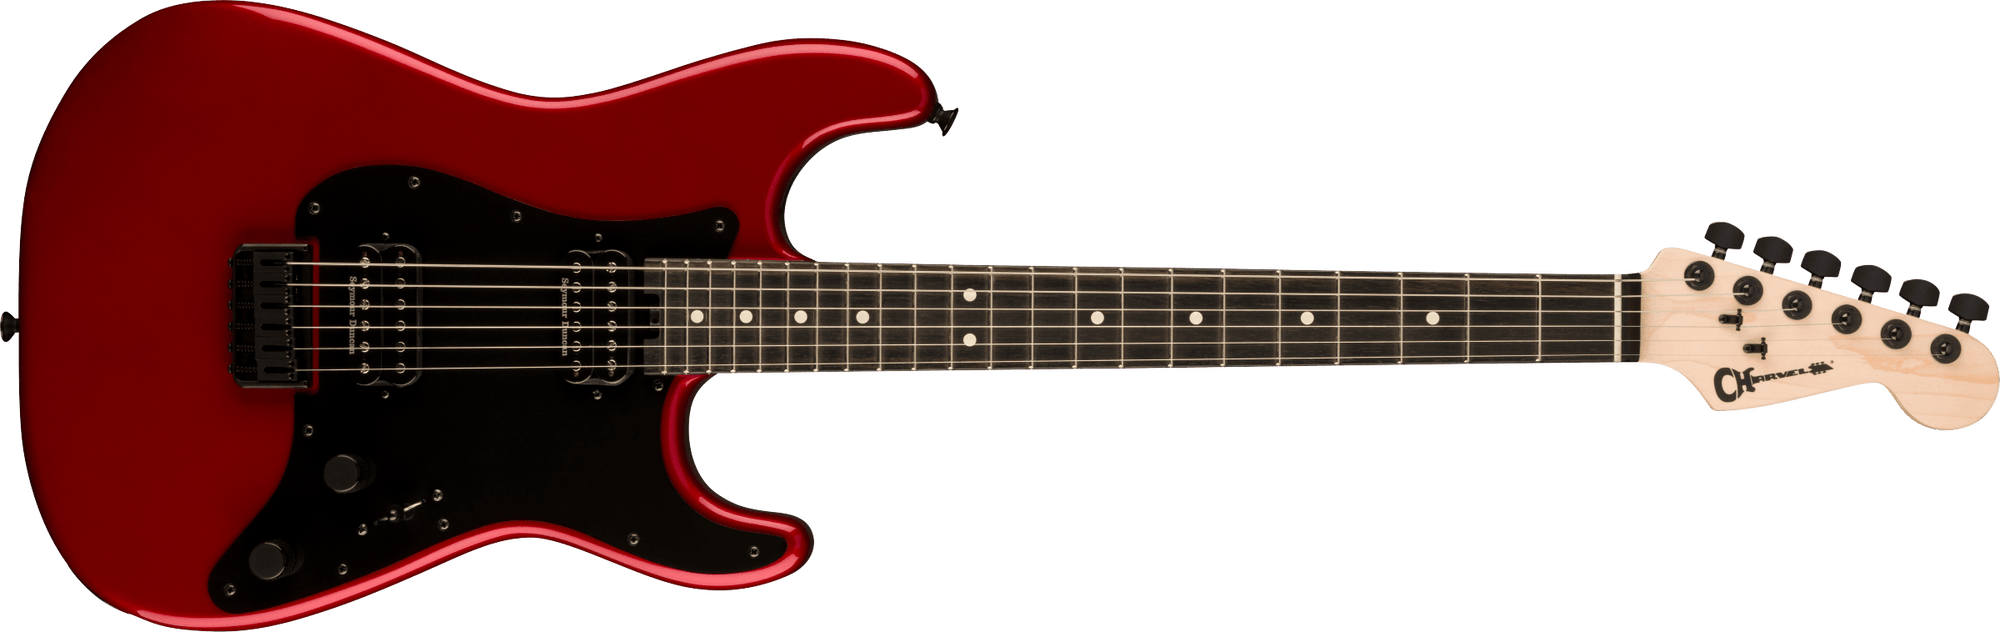 Charvel Pro-Mod So-Cal Style 1 HH HT E, Ebony Fingerboard, Candy Apple Red 2966851509